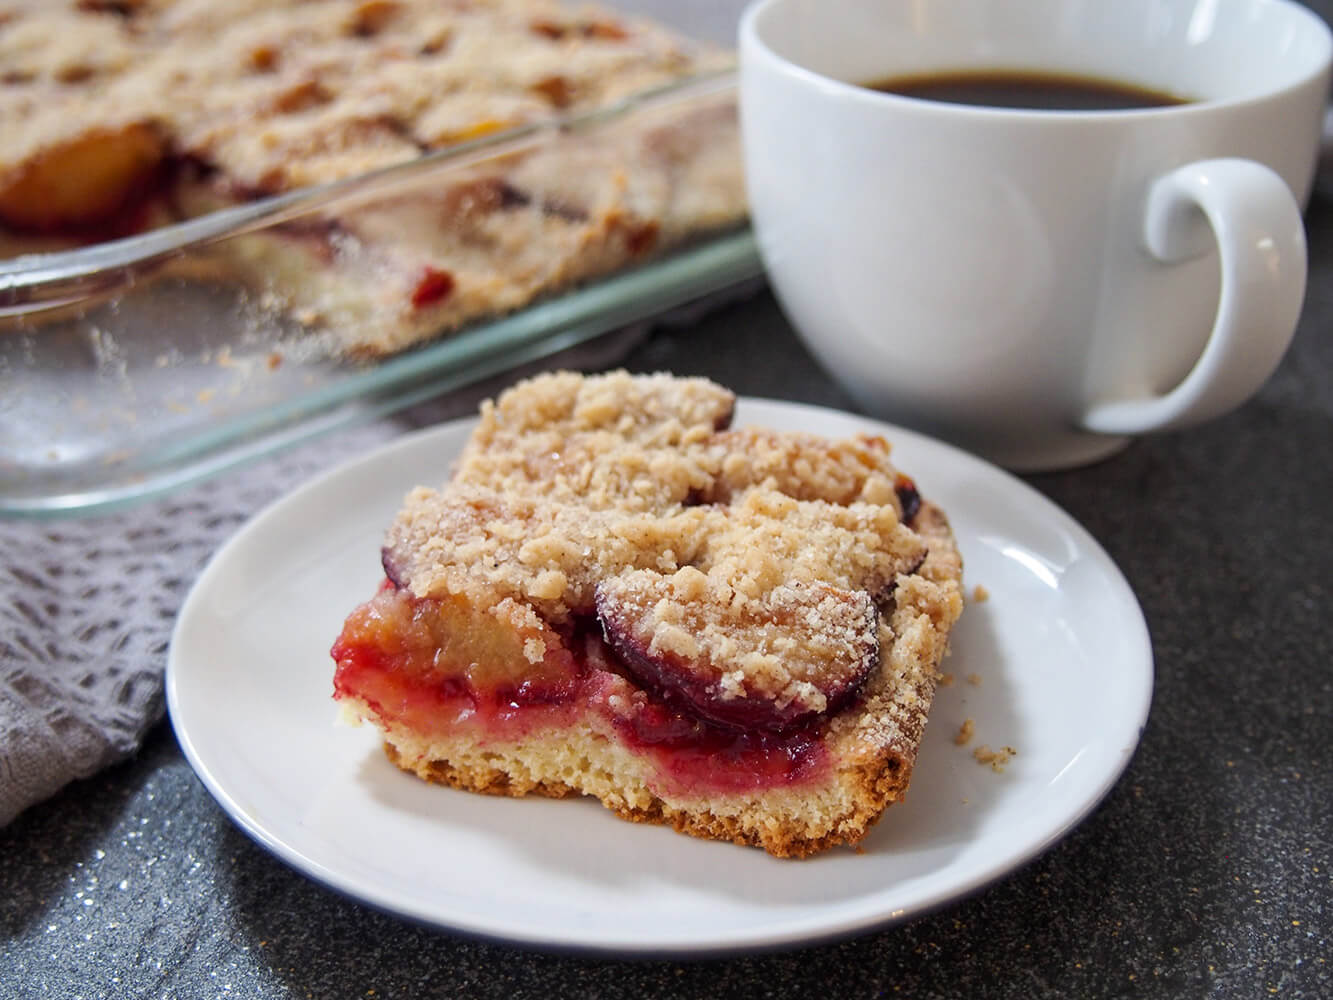 slice of German plum cake (pflaumenkuchen) with cup of coffee to side